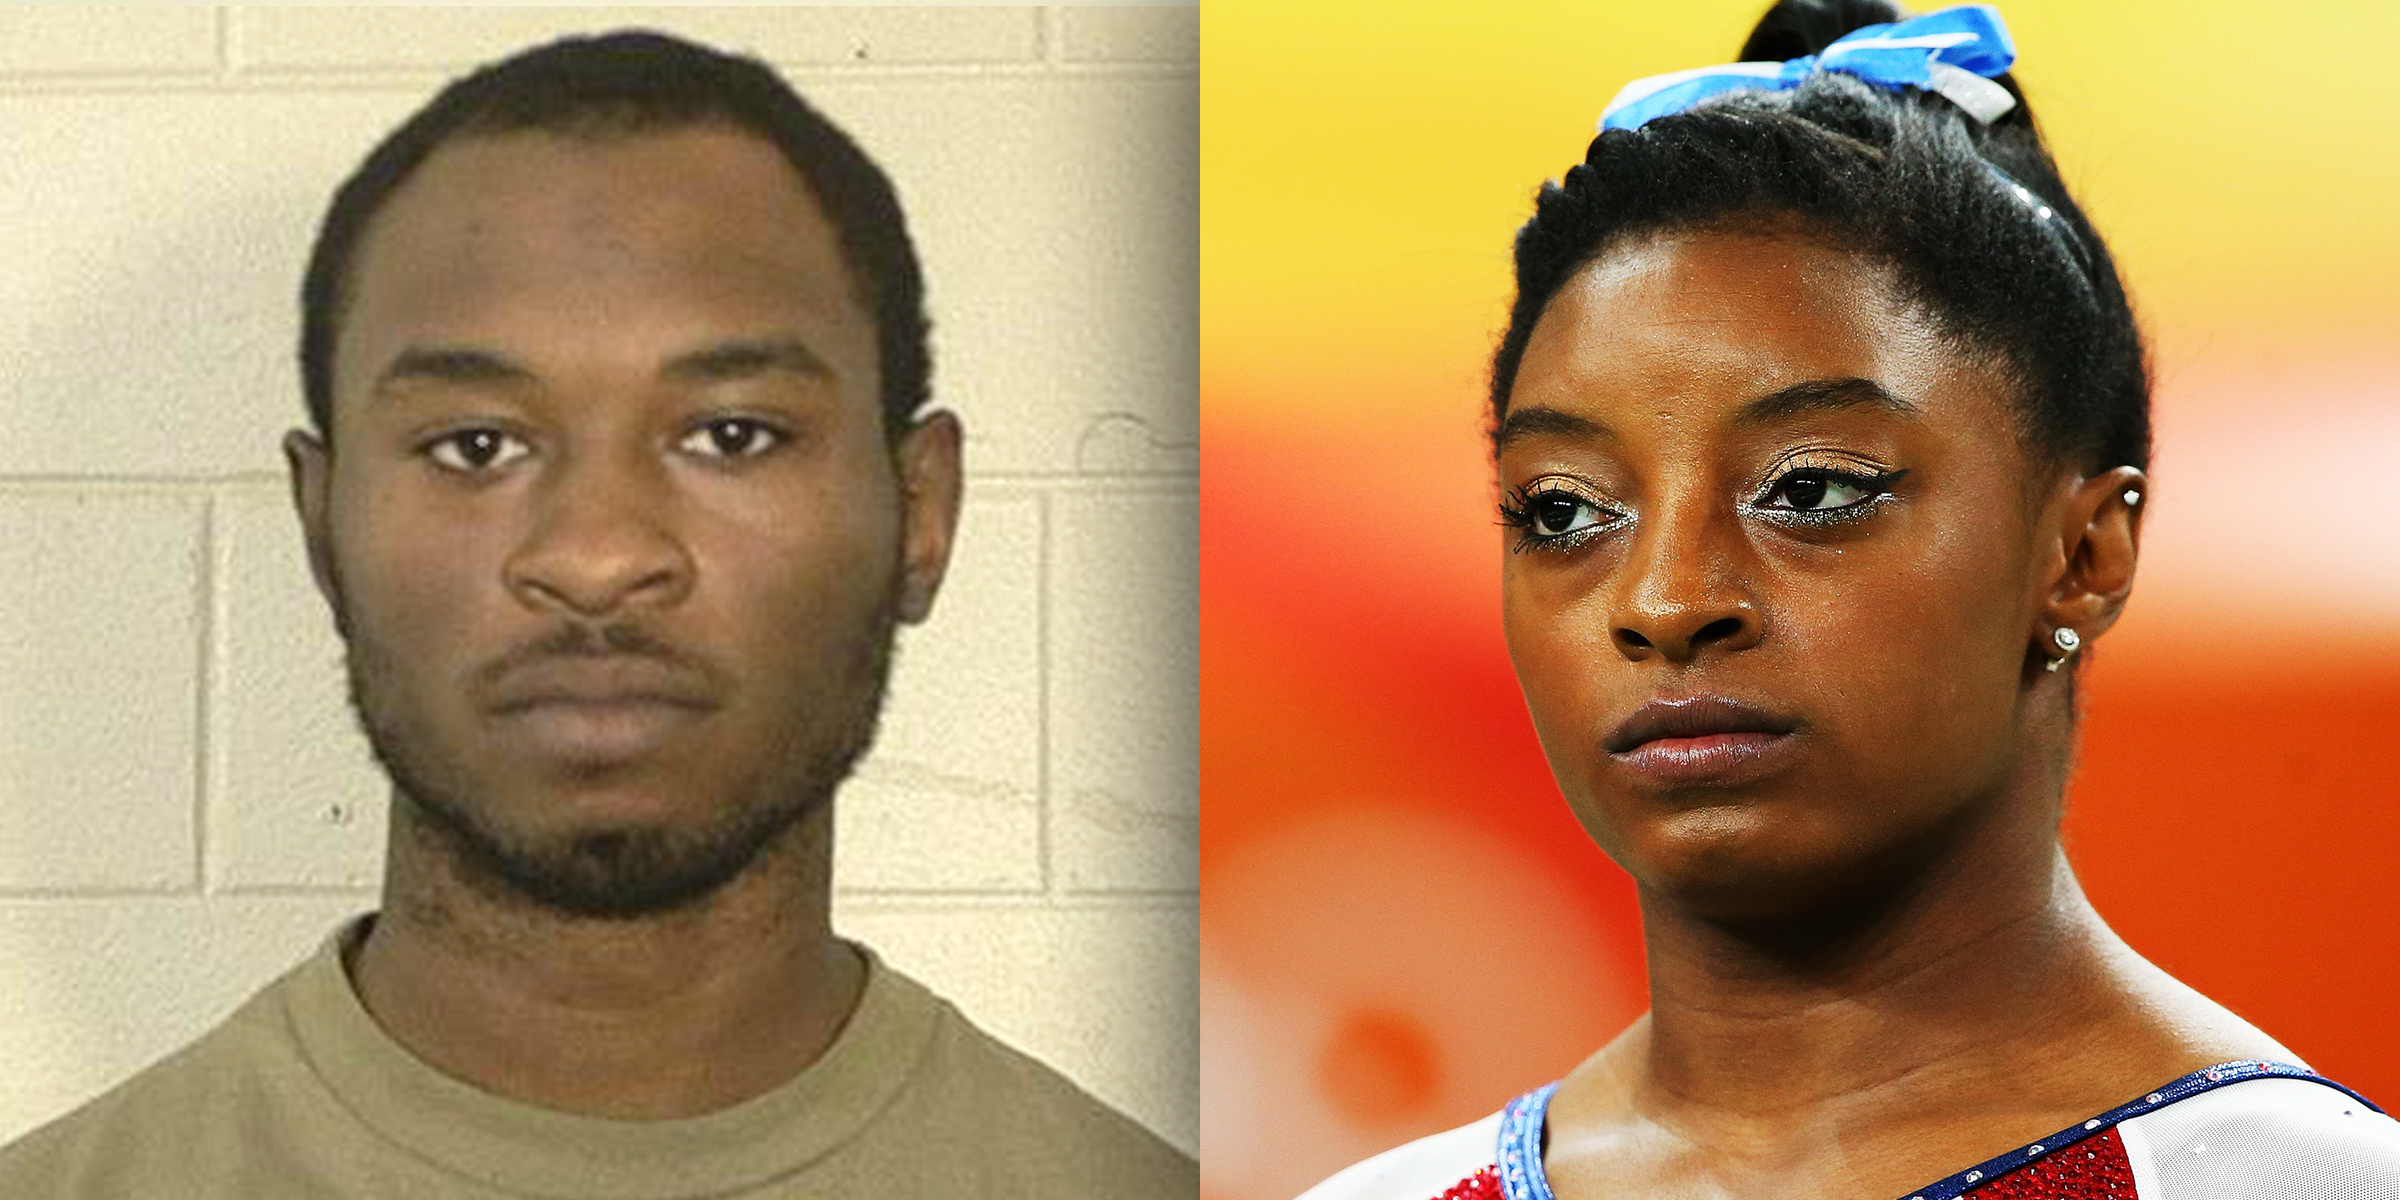 Simone Biles’ Brother Charged With 3 Counts Of Murder In Cleveland, Ohio.